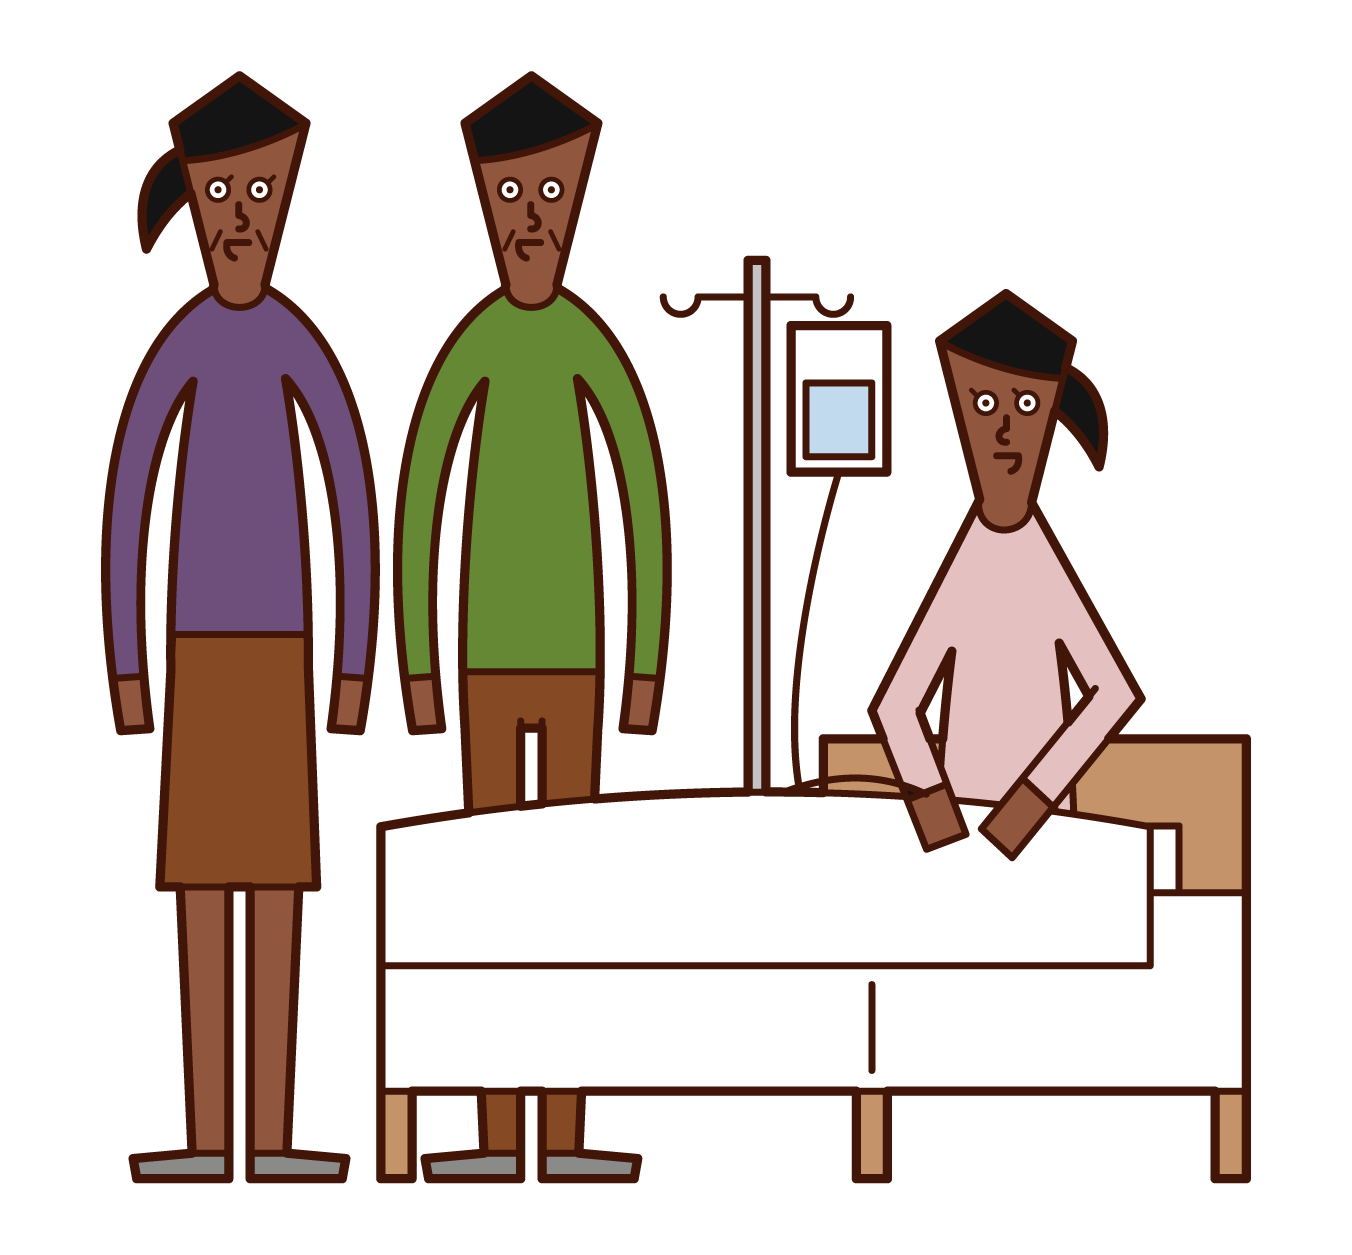 Illustrations of people visiting hospitalized people